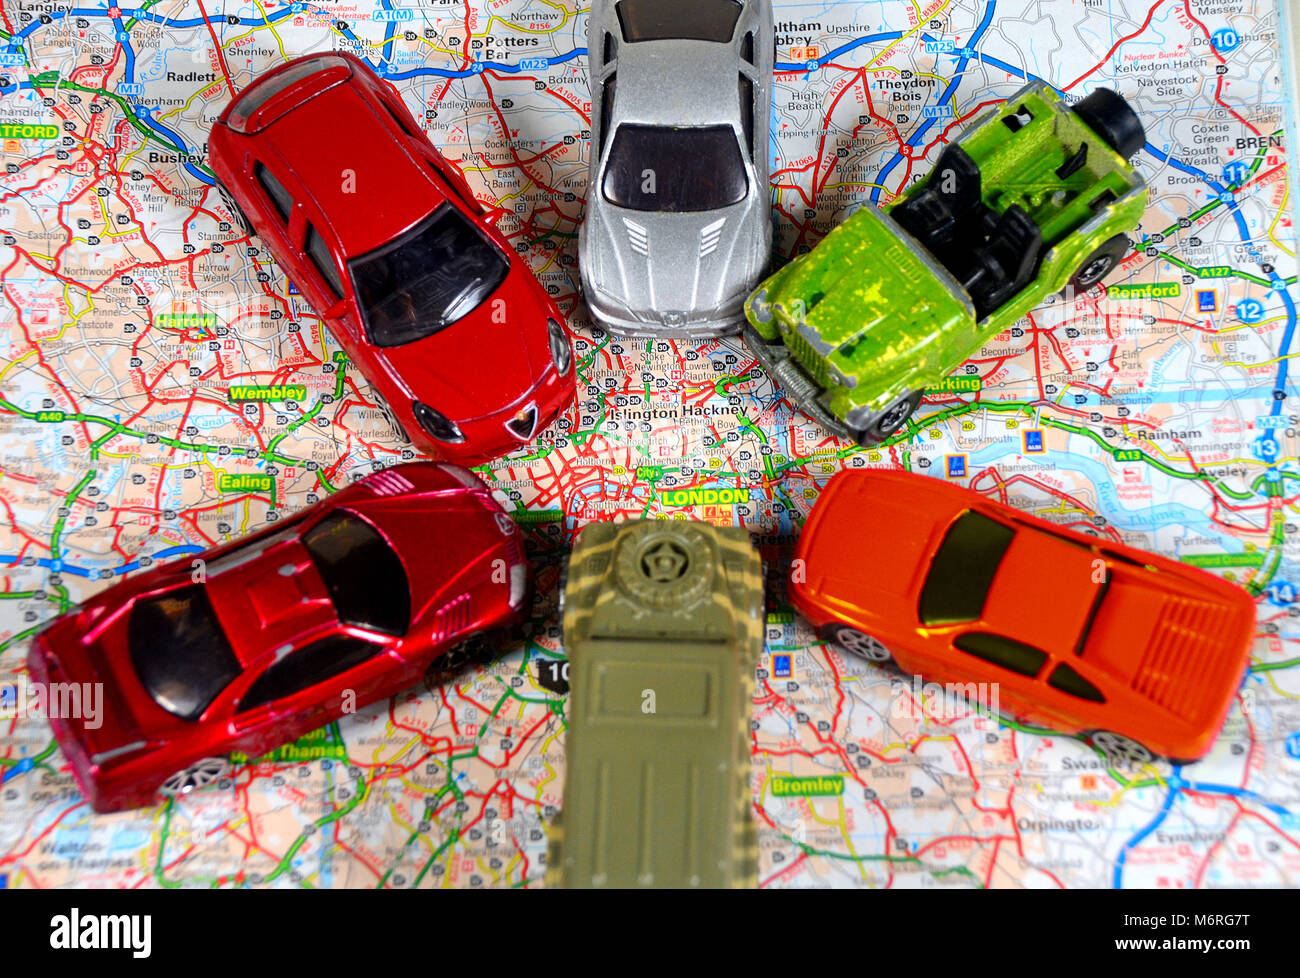 Concept of traffic entering London from all directions  - using toy cars and a road map of Britain. Stock Photo